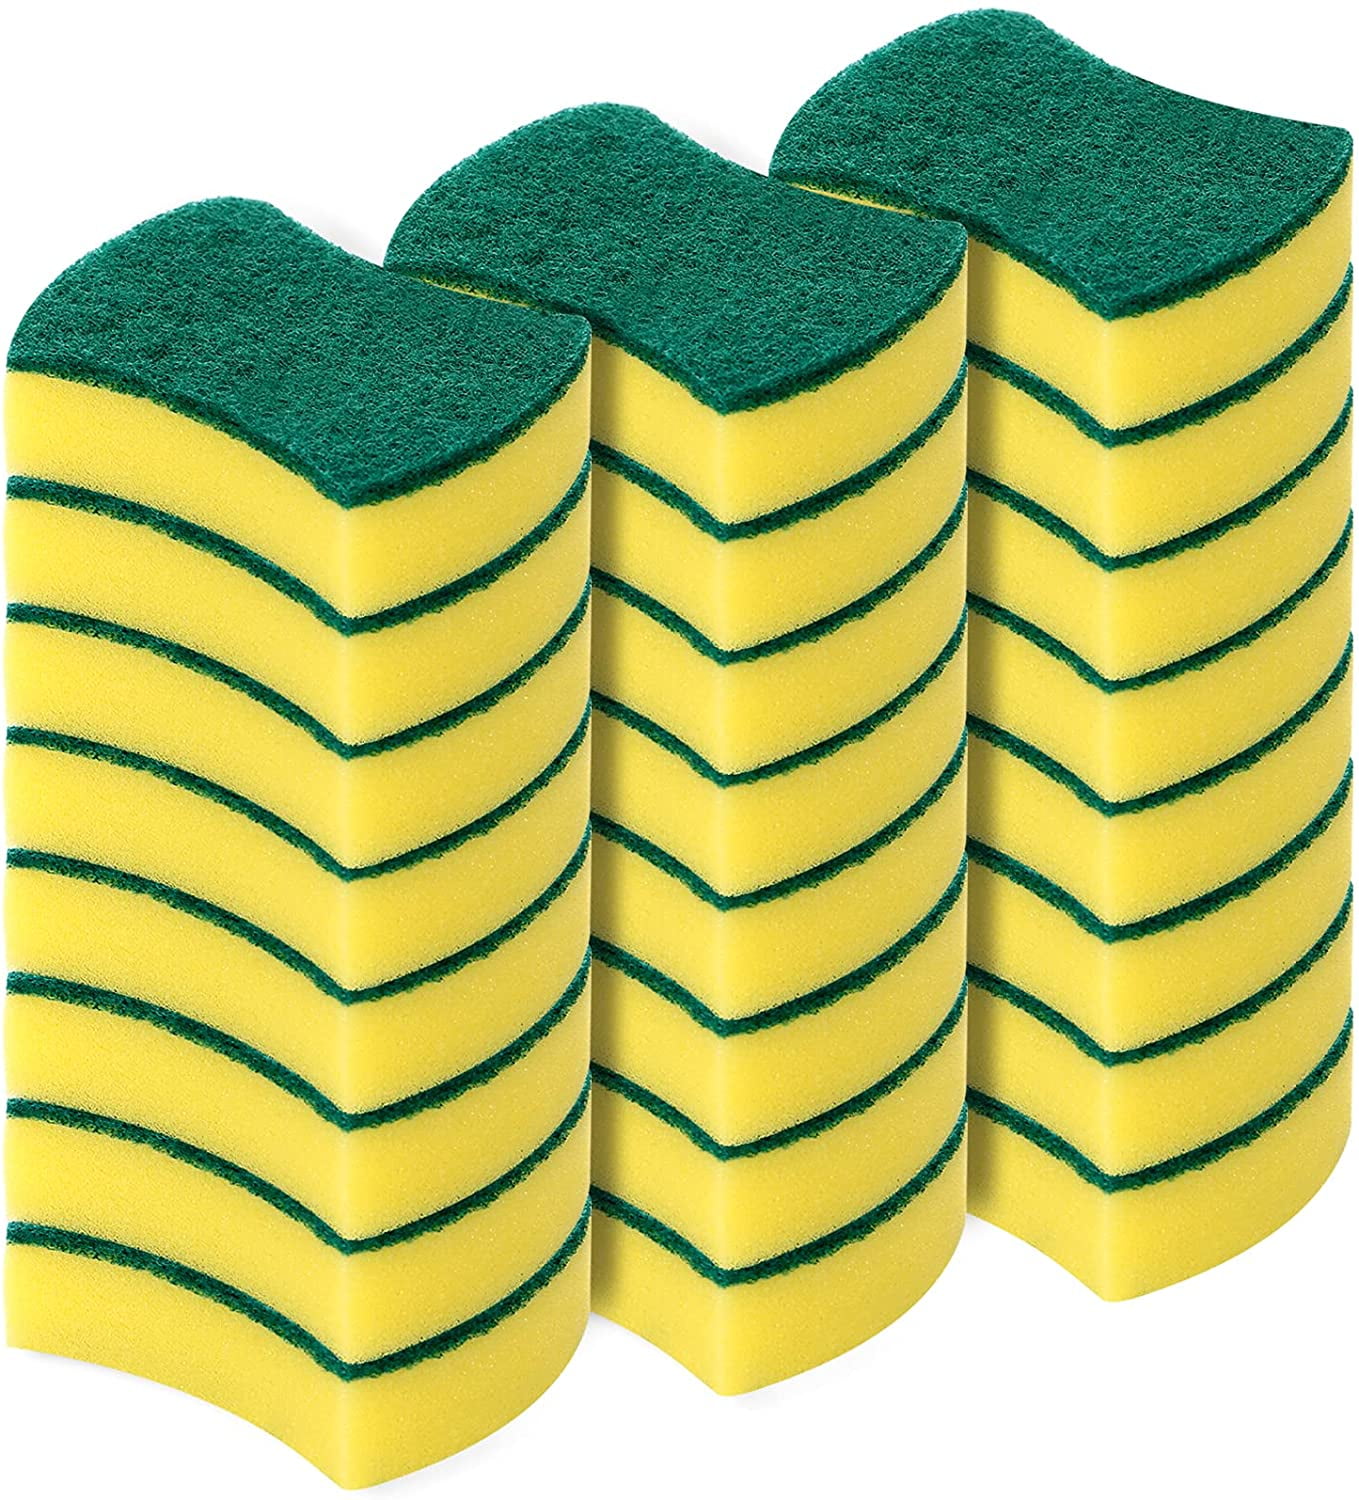 Cleangly Kitchen Cleaning Sponges (Pack of 5 or 10)